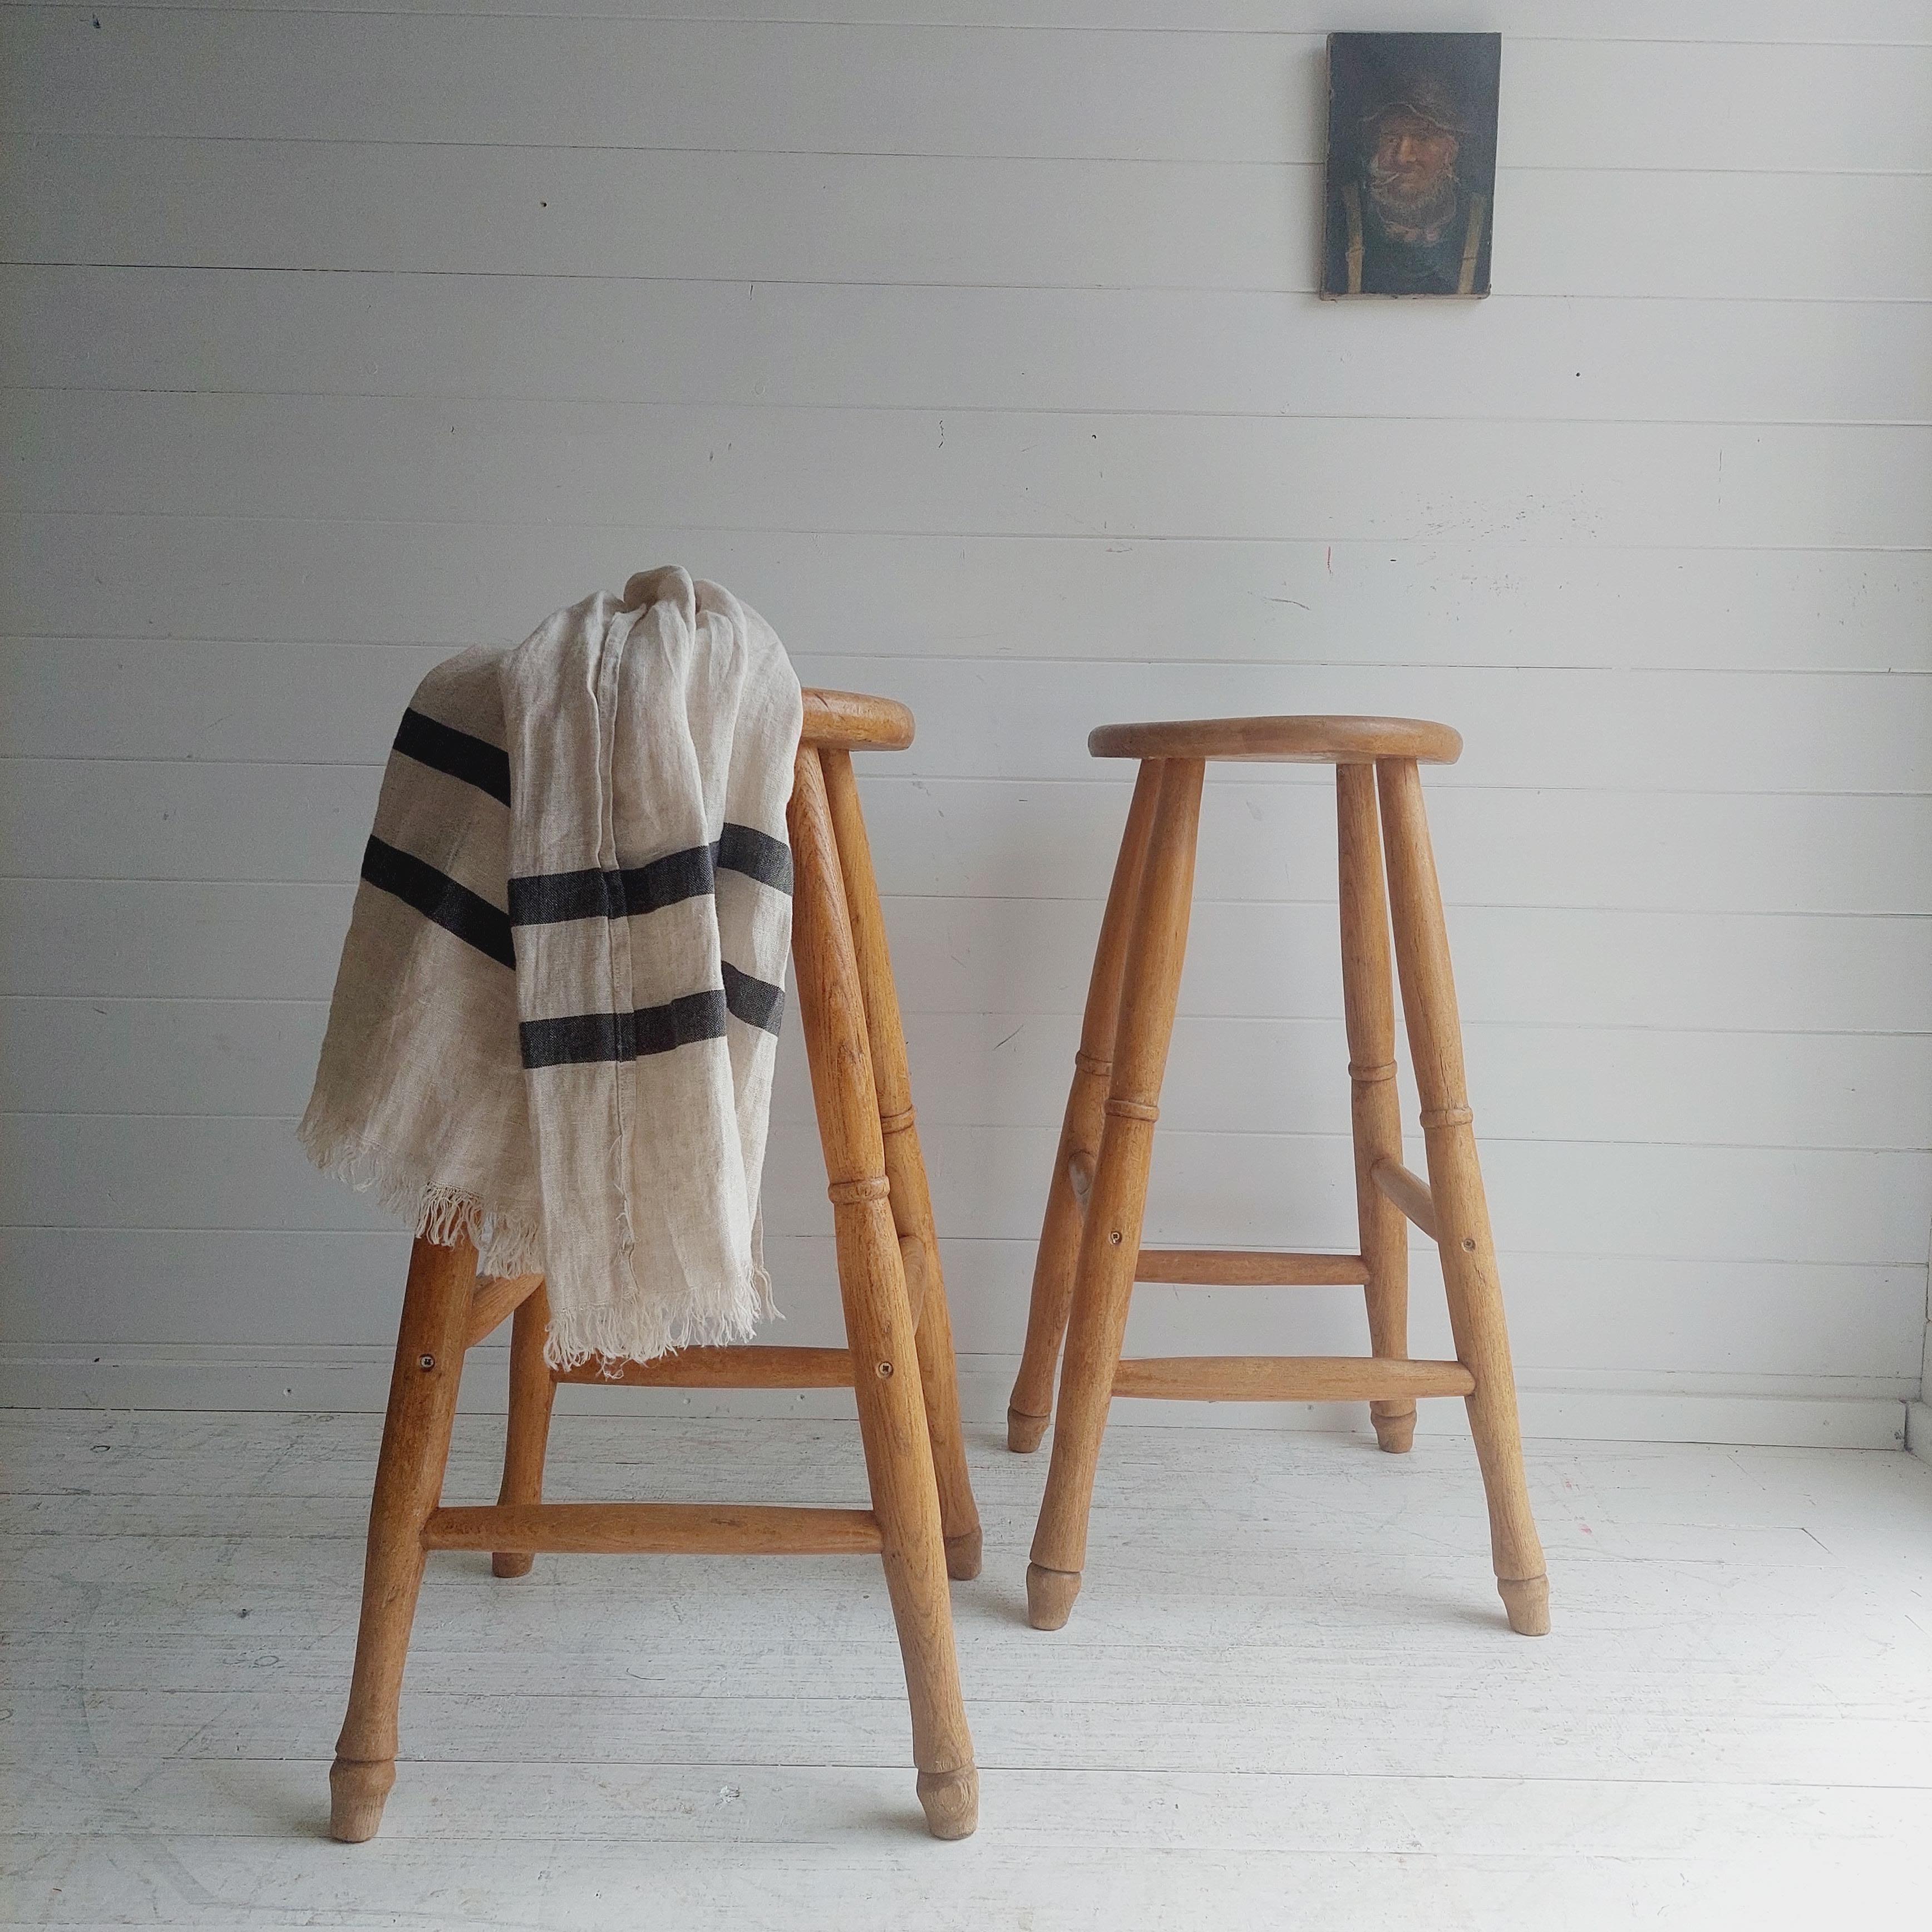 VINTAGE ENGLISH ELM BAR STOOLS CIRCA 1930 SET OF 2

A set of 2 elm barstools with tapered legs and round seats.
The stools were probably made in England in the 1930s.

A lovely country, cottage rustic style set, either perfect for antique /rustic